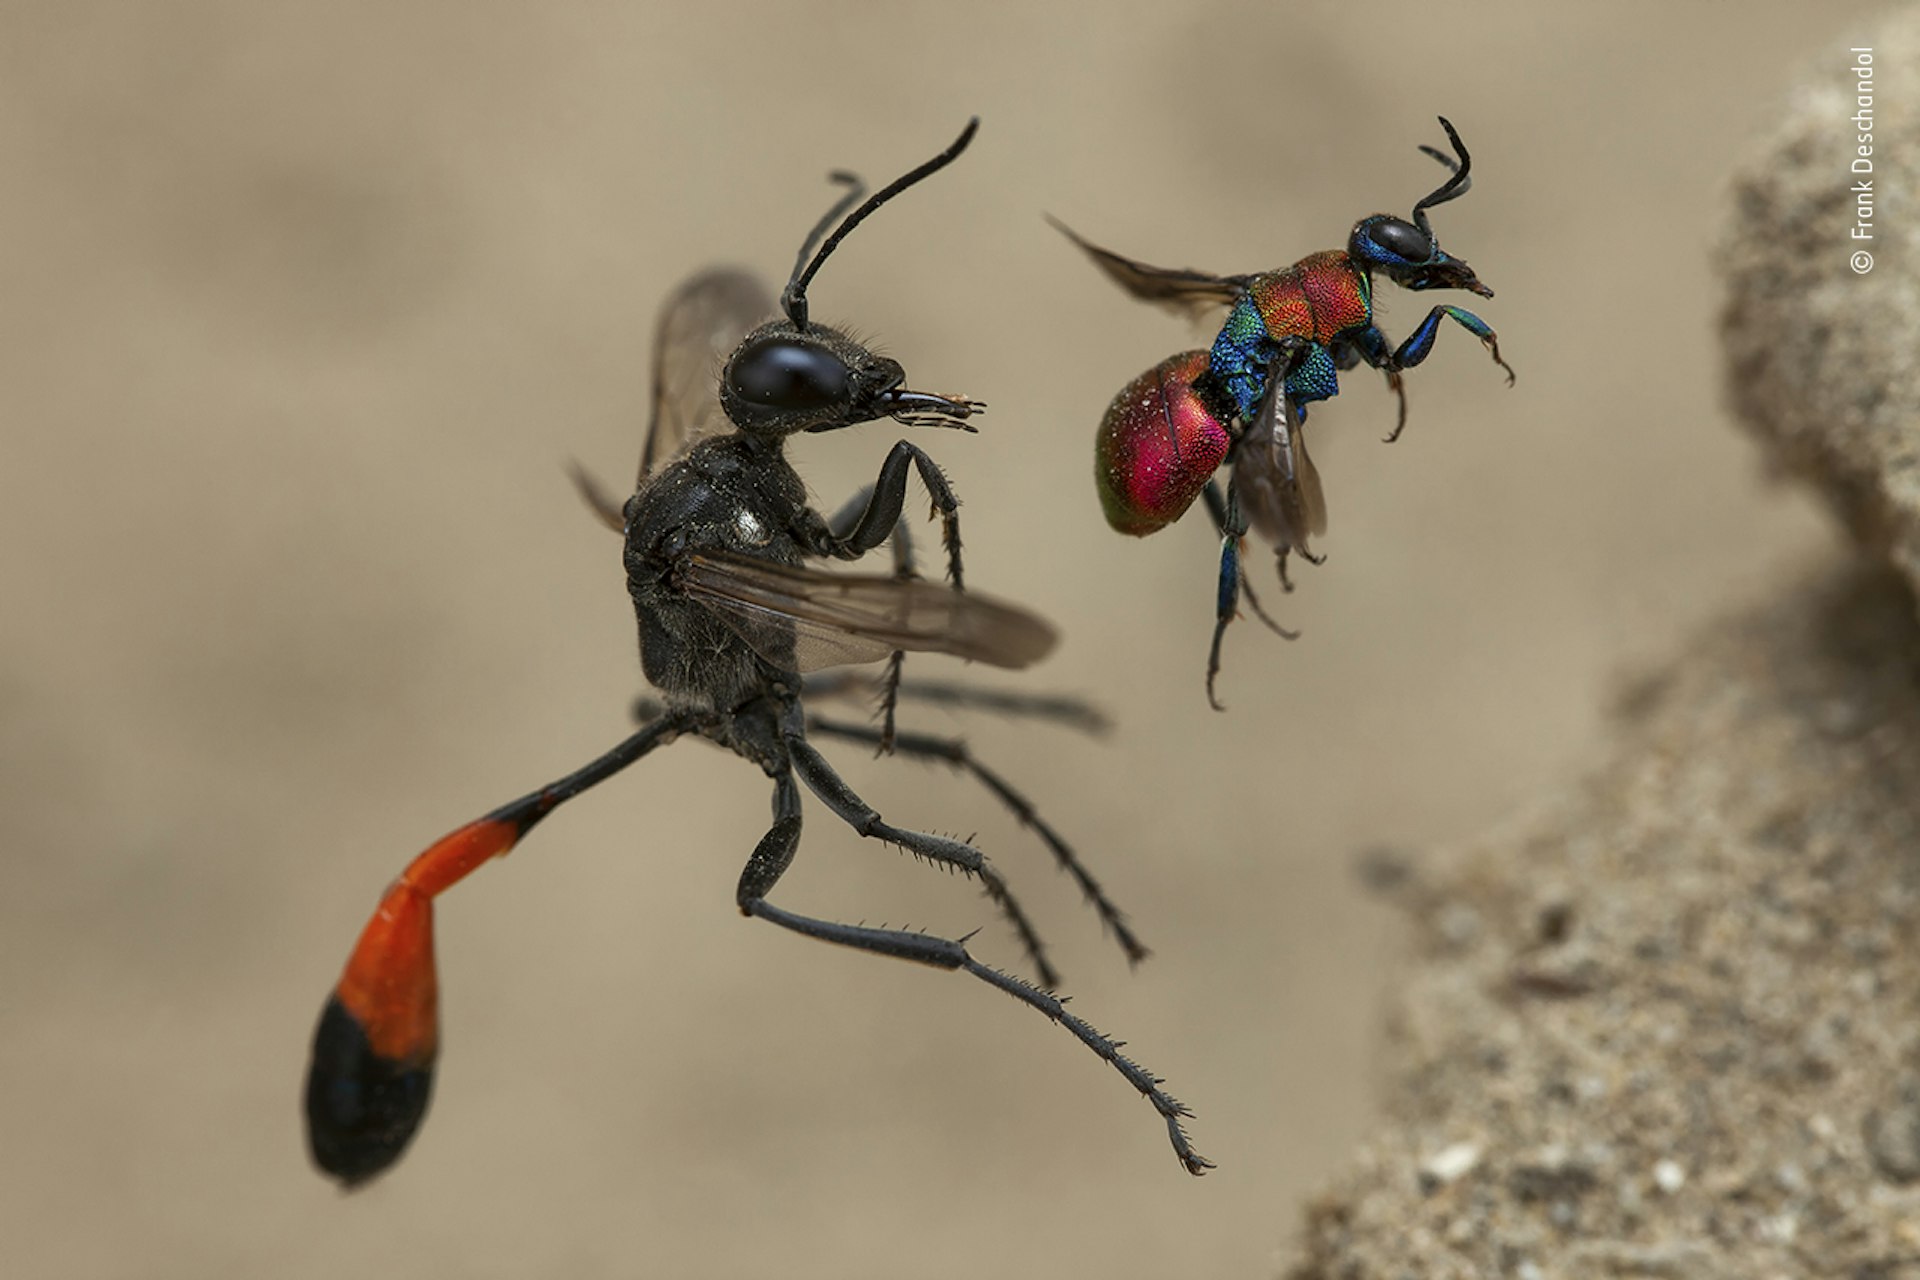 A red-banded sand wasp and a cuckoo wasp, about to enter next-door nest holes